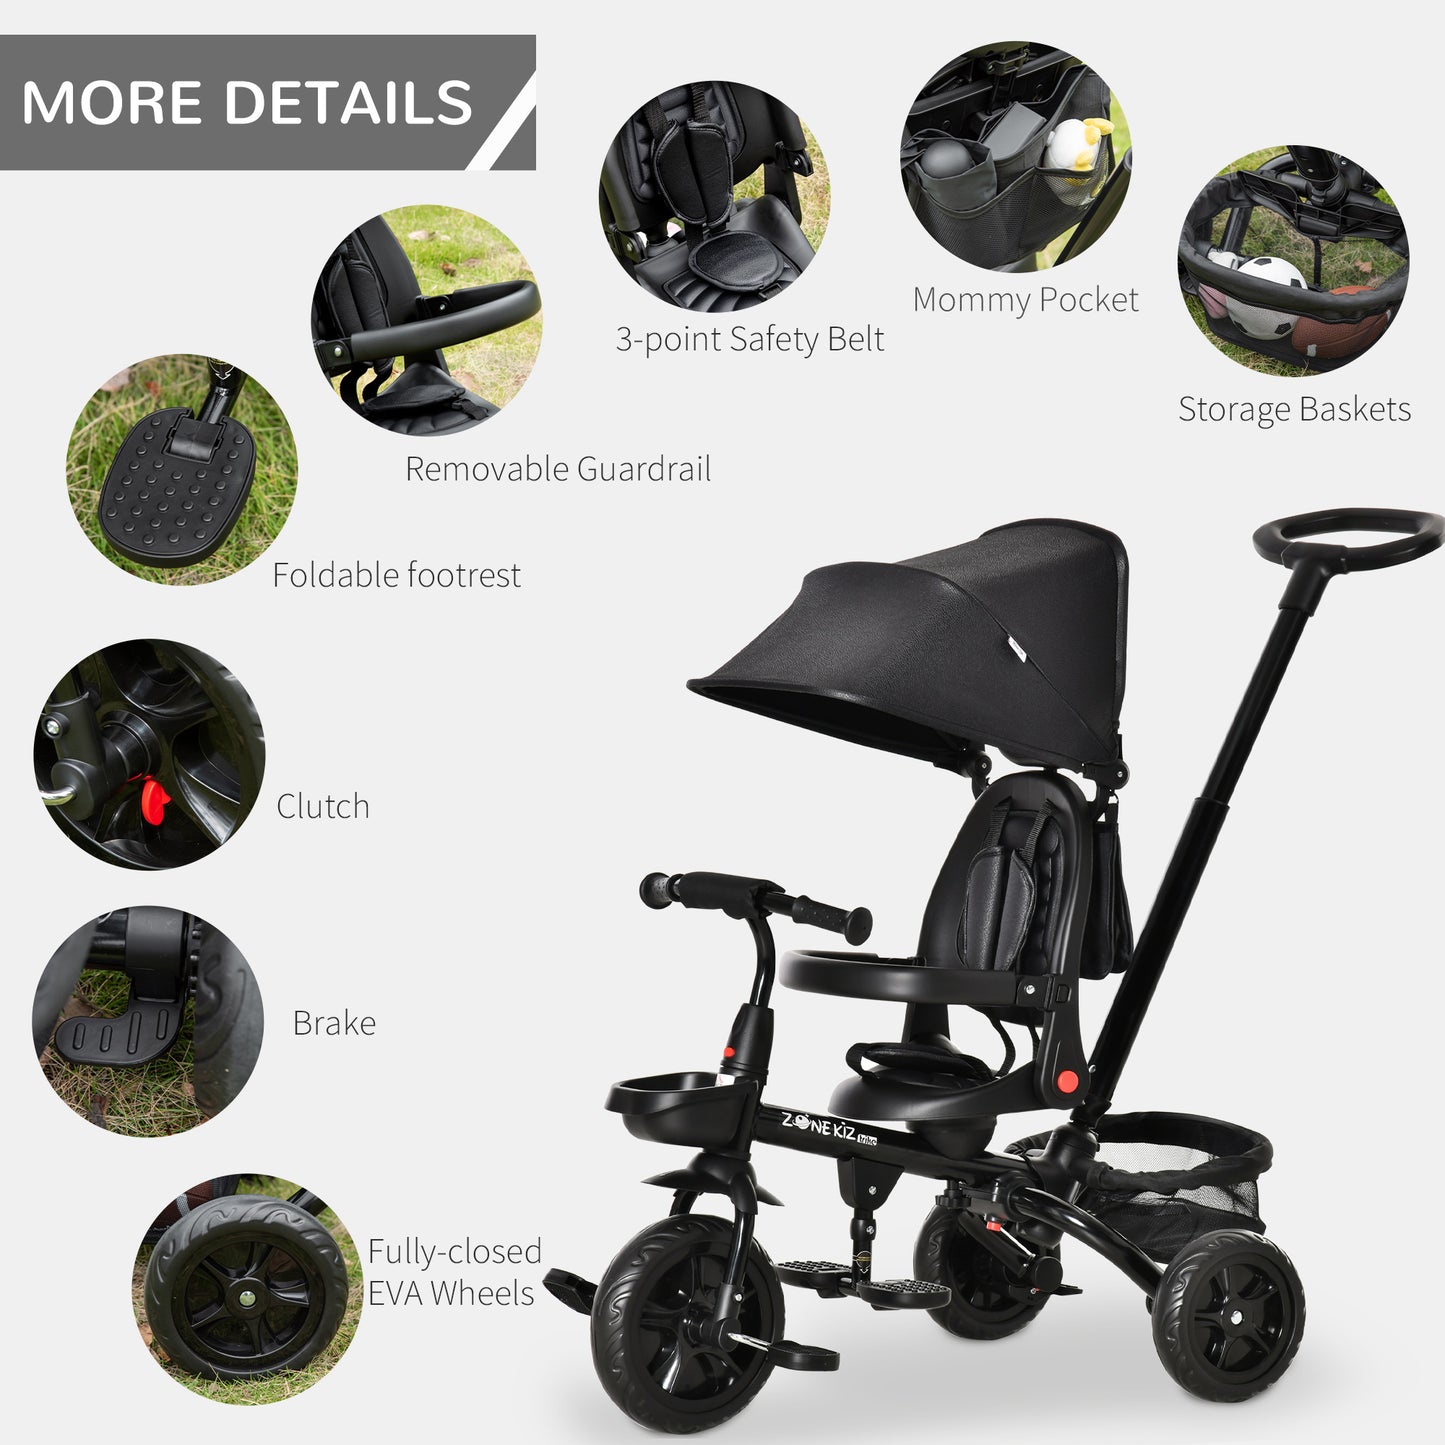 HOMCOM 4 in 1 Baby Tricycle Toddler Stroller Foldable Pedal Tricycle w/ Reversible Angle Adjustable Seat Removable for 1-5 Years - Black